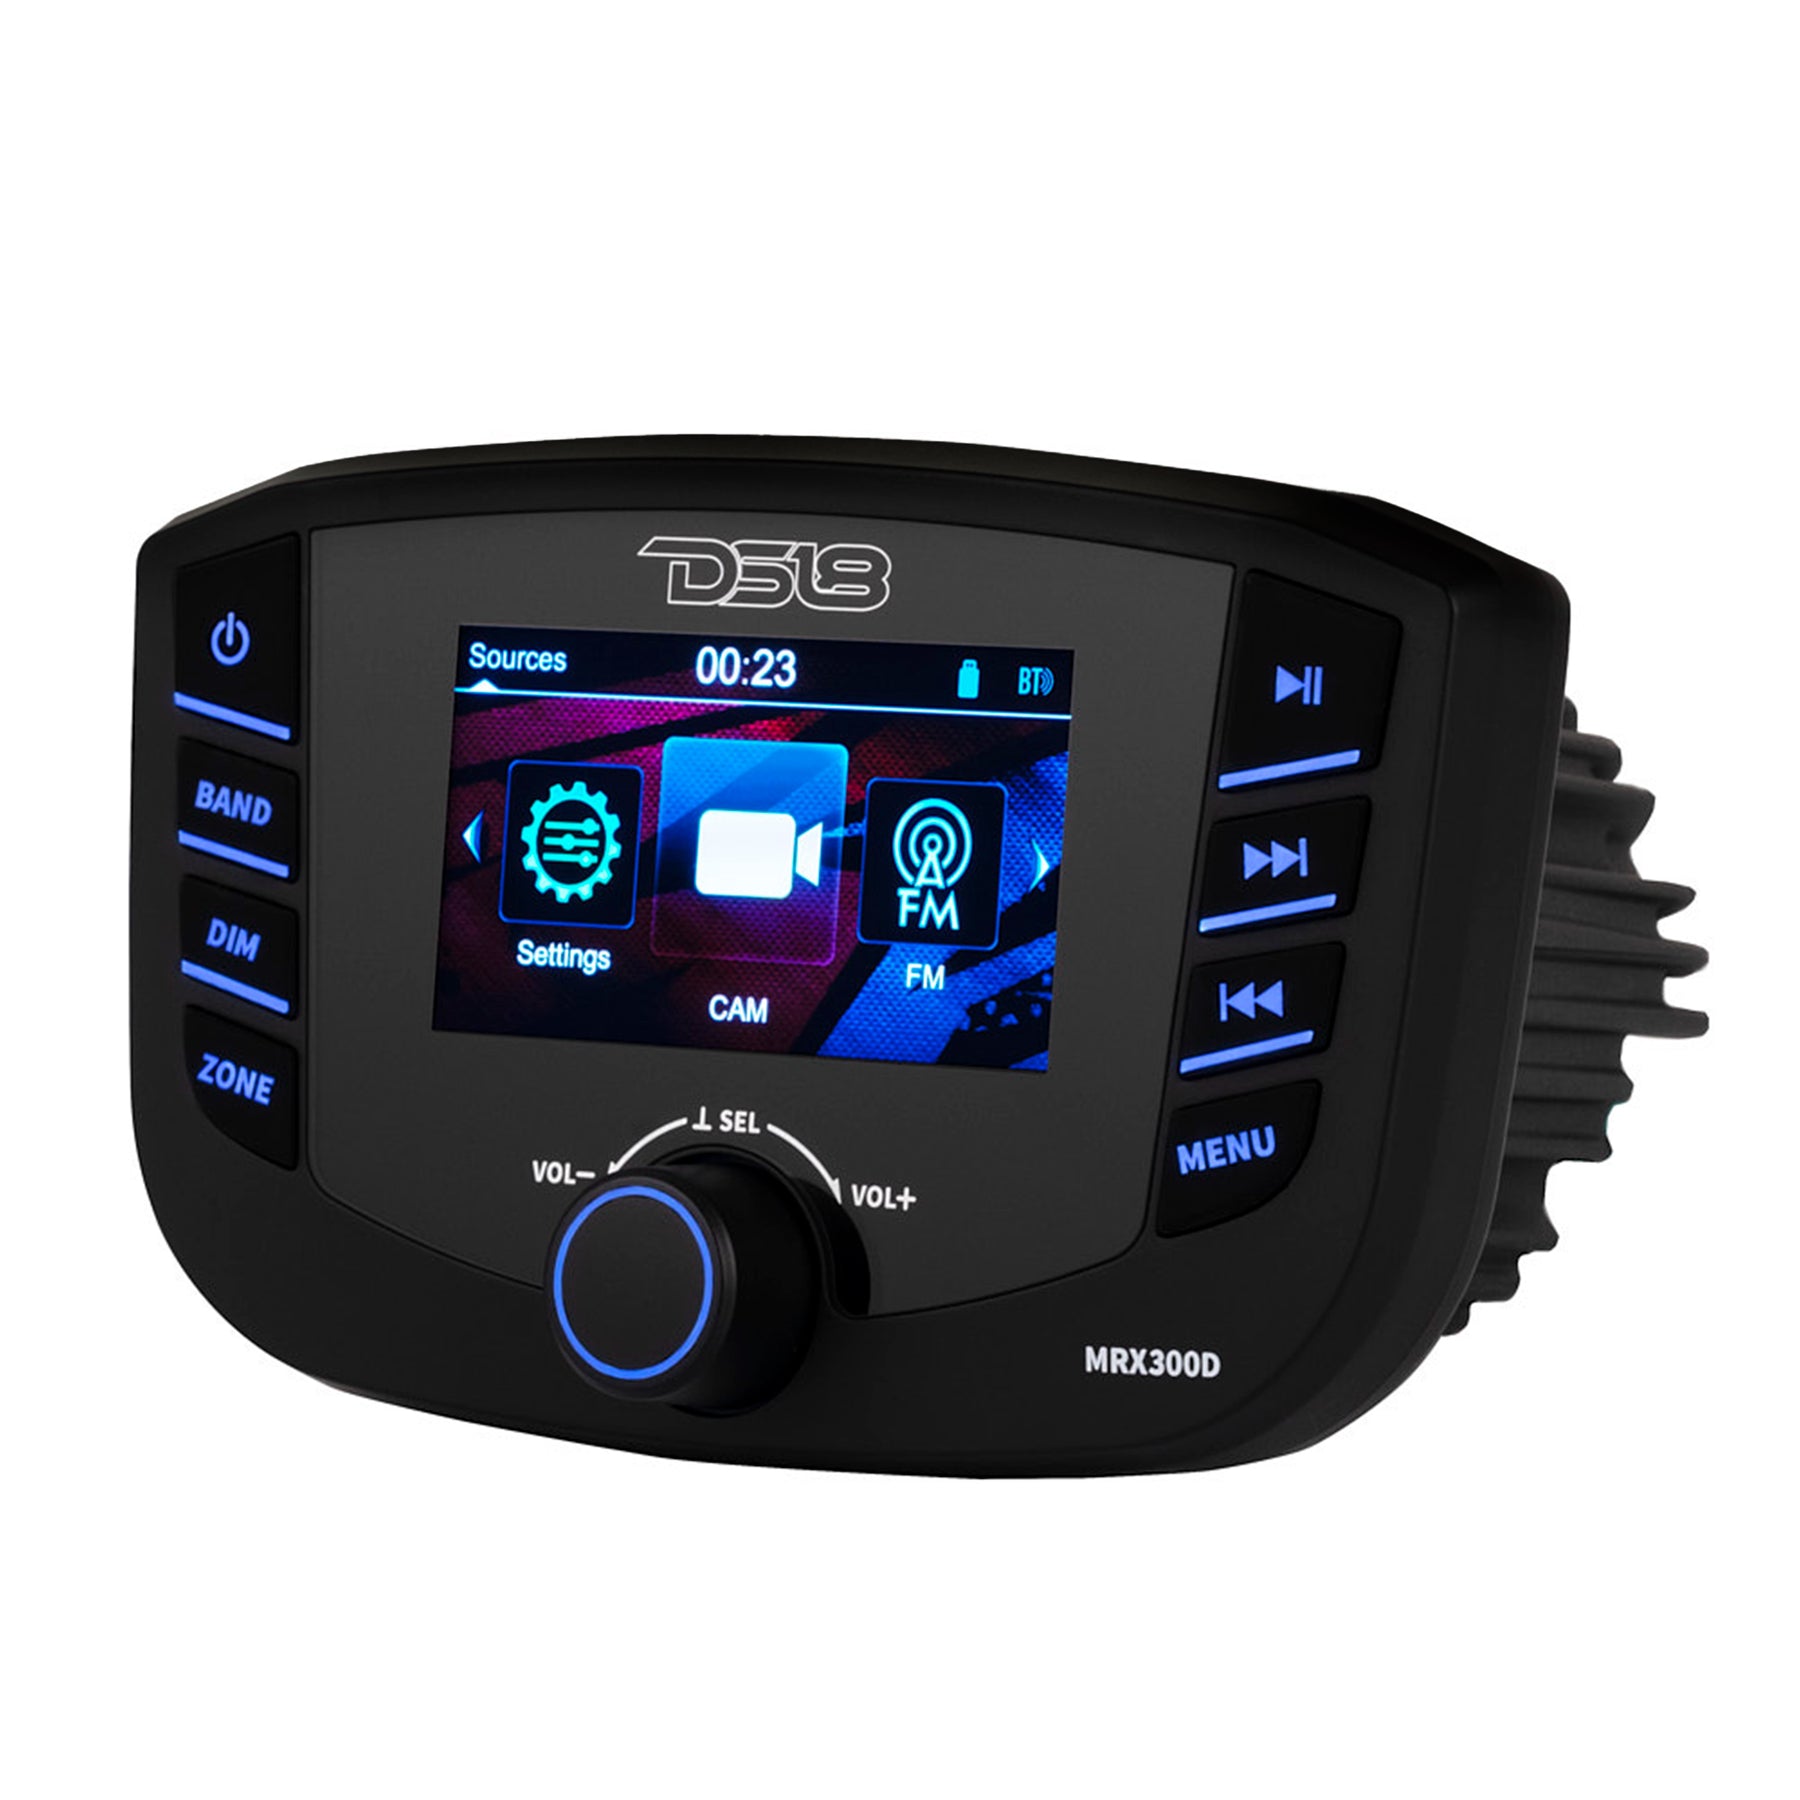 Marine Headunit TFT screen , 3 Zones, 4 volts Output, Bluetooth, RDS 4X50 Watts With DAB+ for Europe